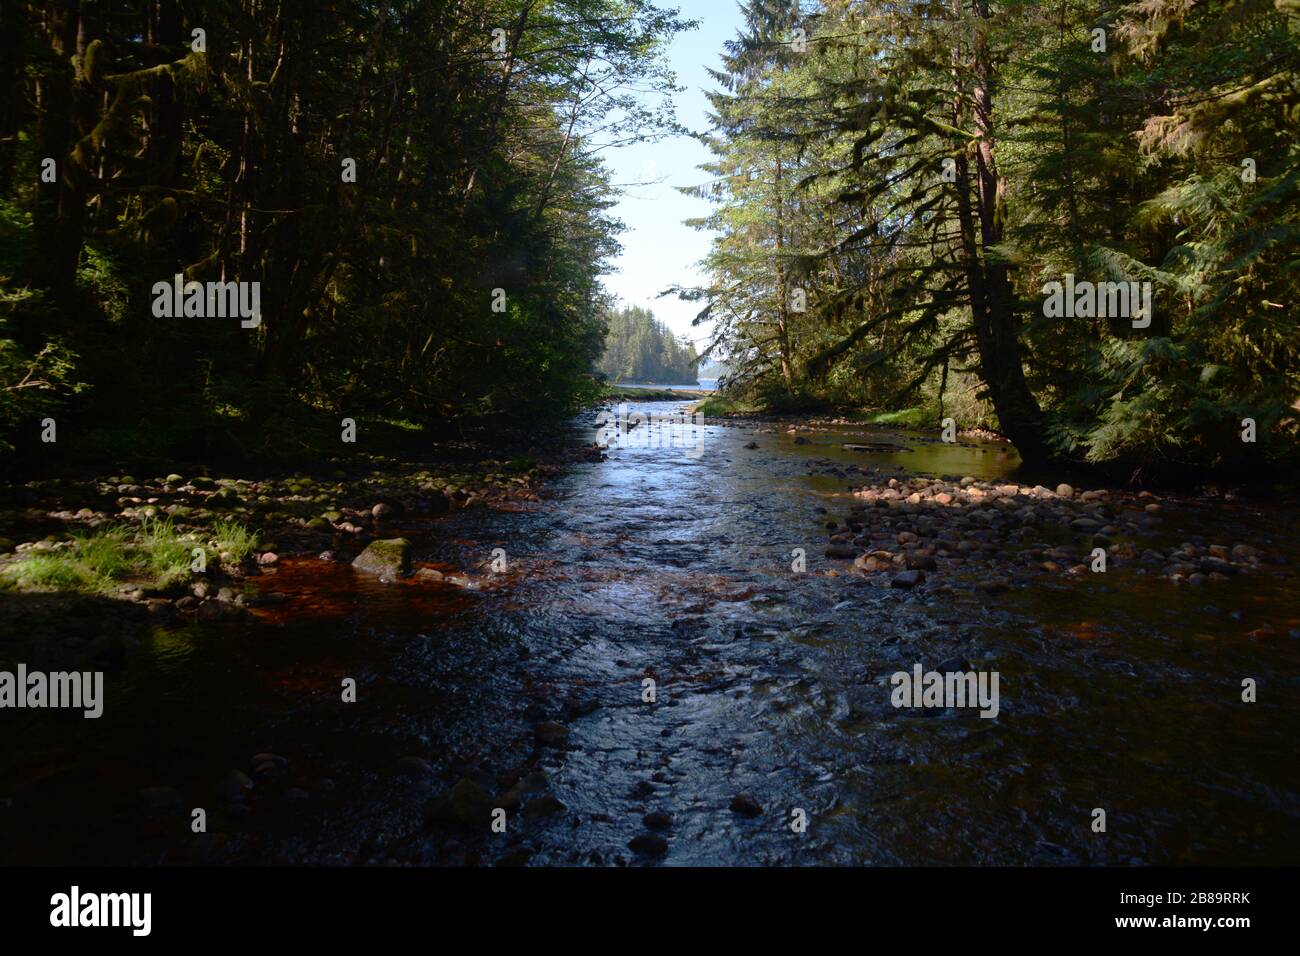 A salmon river system entering the Pacific Ocean on King Island in the Great Bear Rainforest on the central coast of British Columbia, Canada. Stock Photo